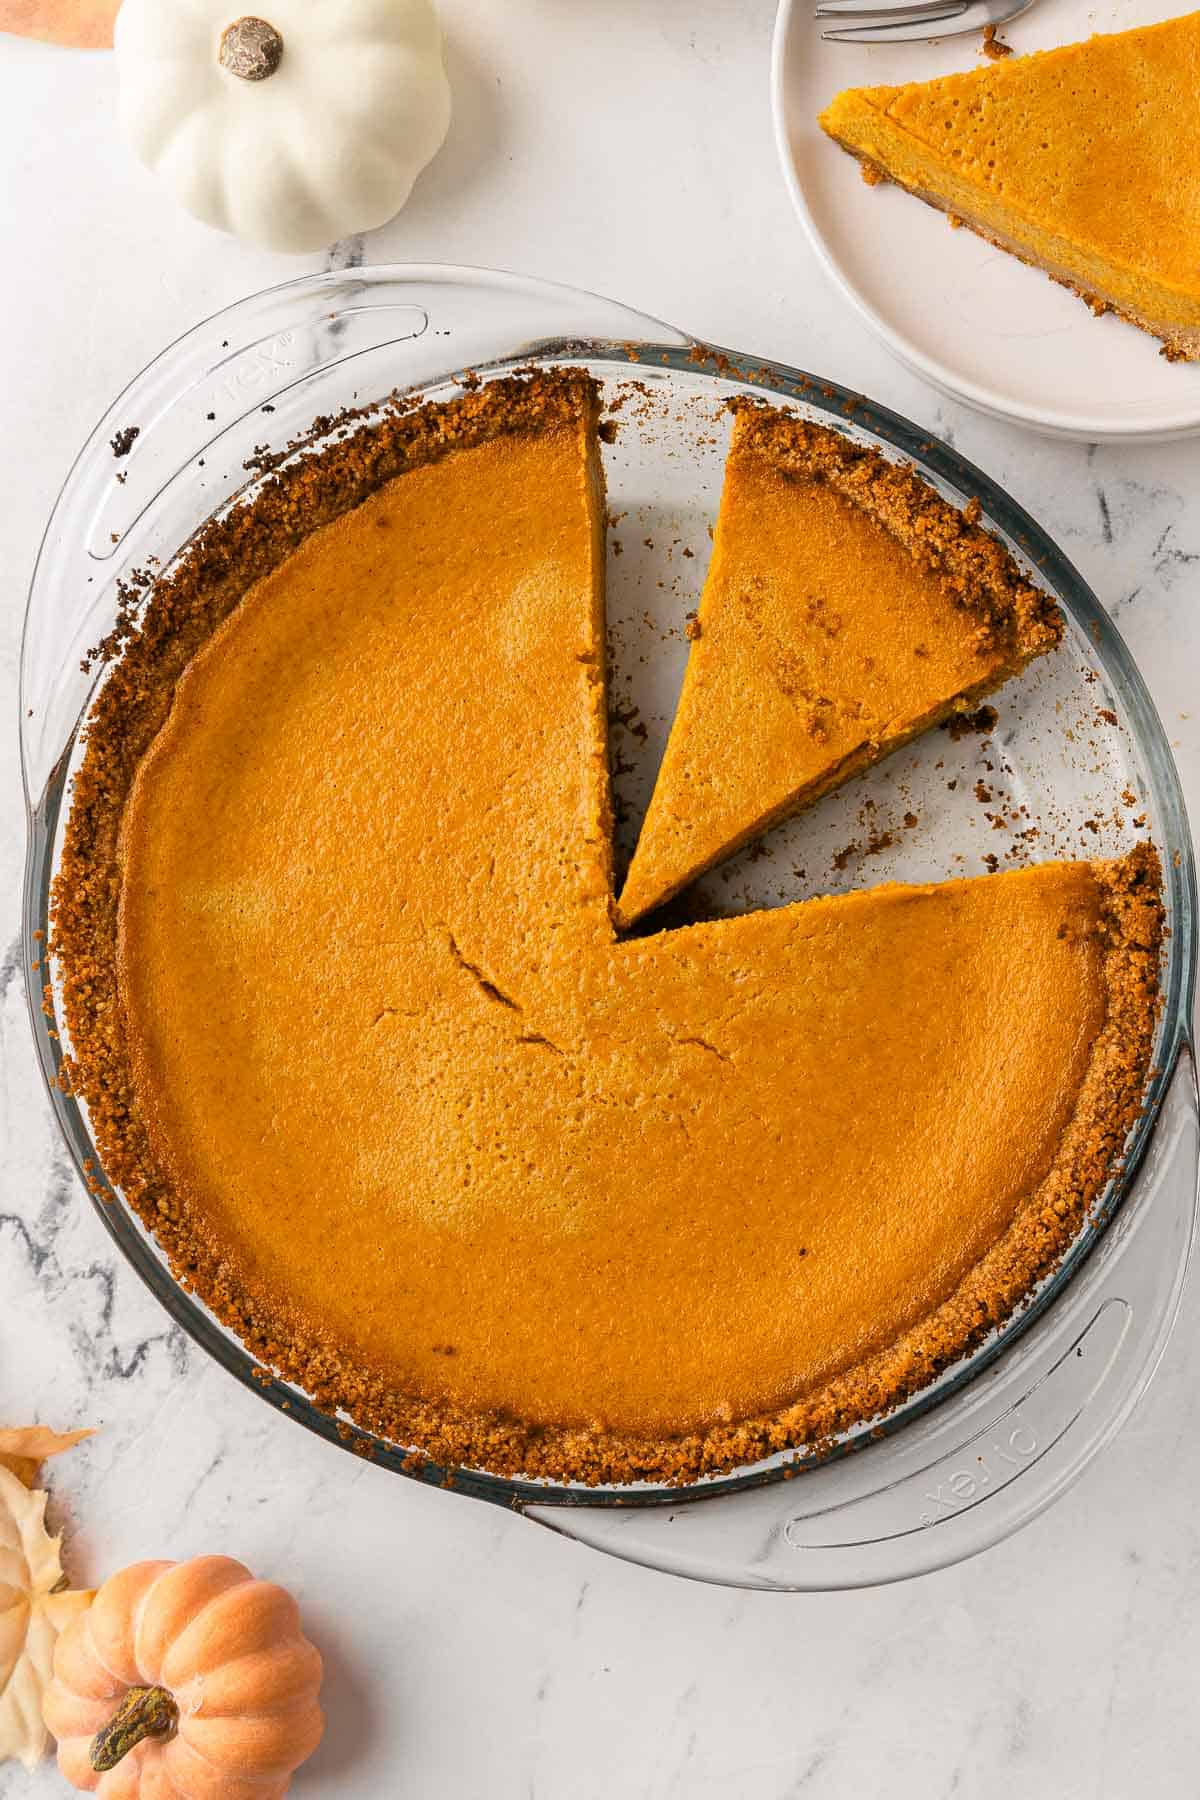 Pumpkin pie with a graham cracker crust. Two slices cut from the pie with one on a plate nearby.